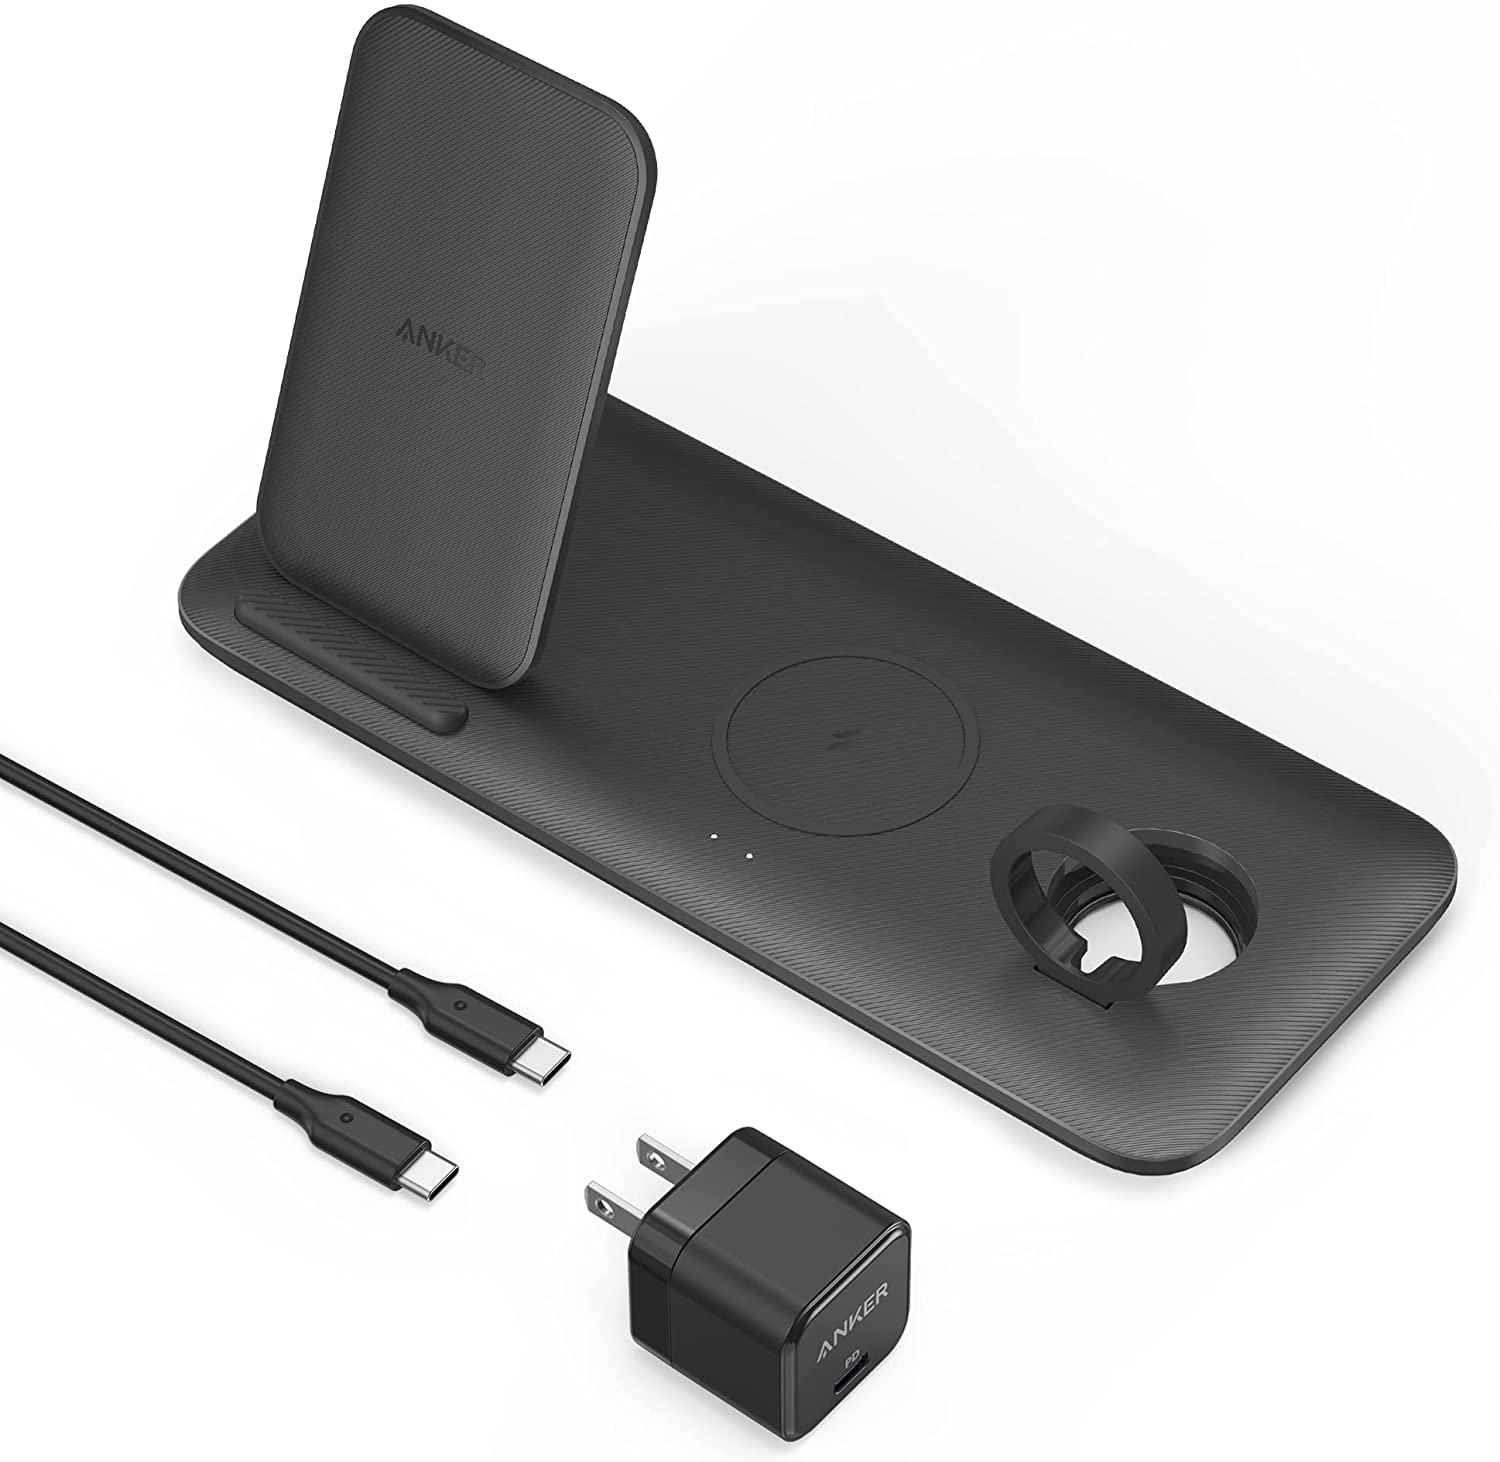 The new Anker 333 Wireless Charger comes with a power adapter, which is not always the case with new Anker chargers.